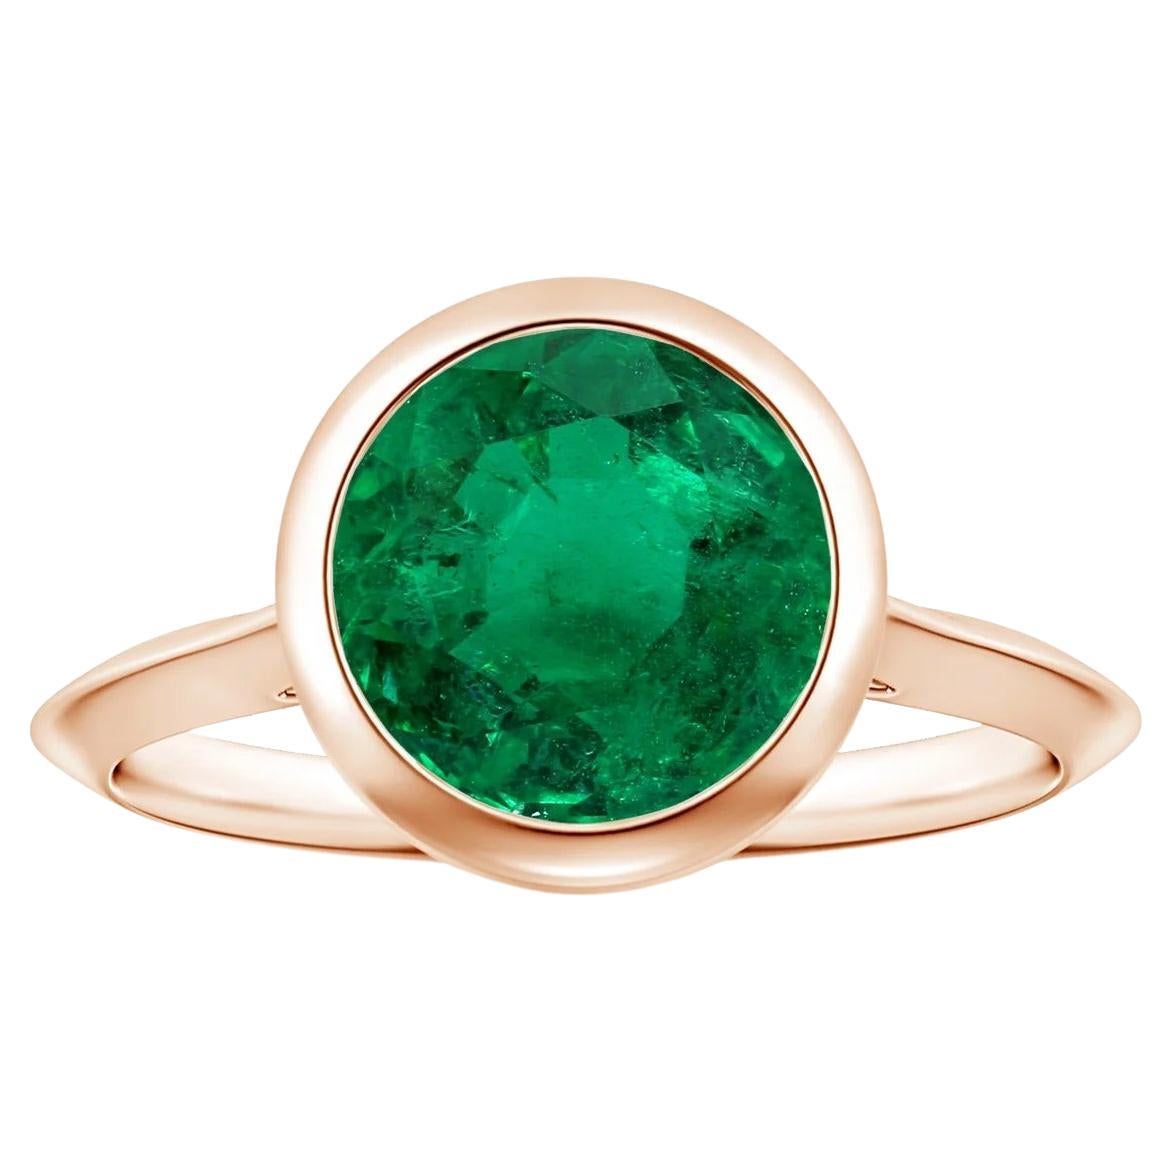 ANGARA Bezel-Set GIA Certified Solitaire Emerald Ring in Rose Gold